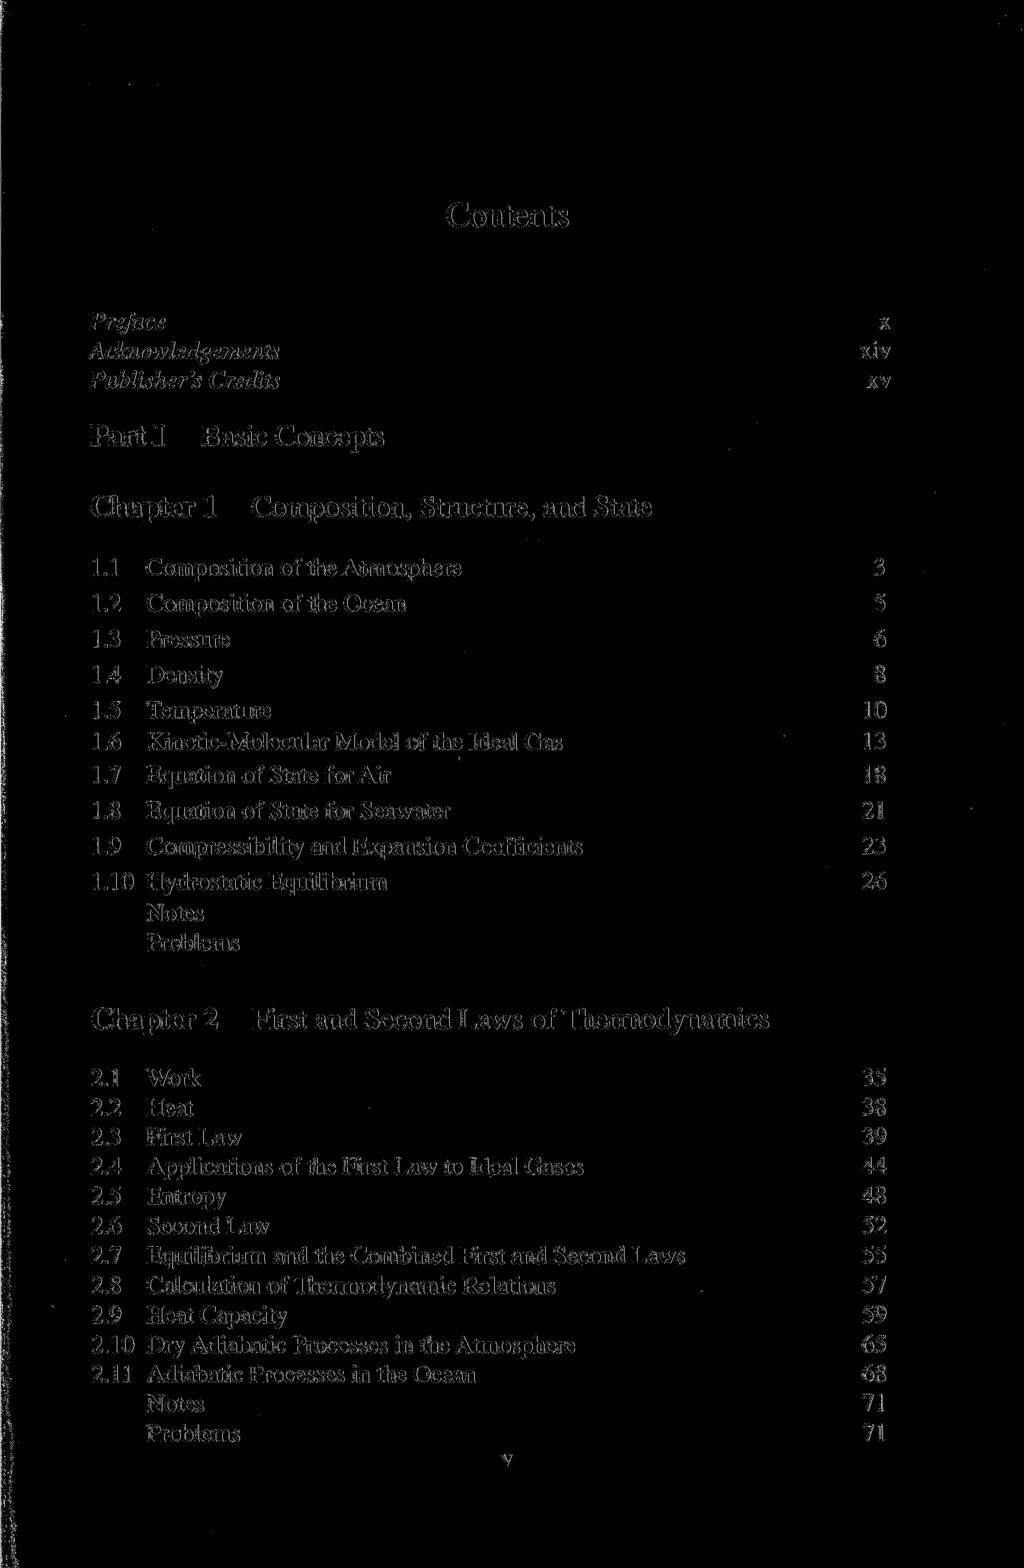 Contents Preface Acknowledgements Publisher's Credits Part I Basic Concepts x xiv xv Chapter 1 Composition, Structure, and State 1.1 Composition of the Atmosphere 3 1.2 Composition of the Ocean 5 1.